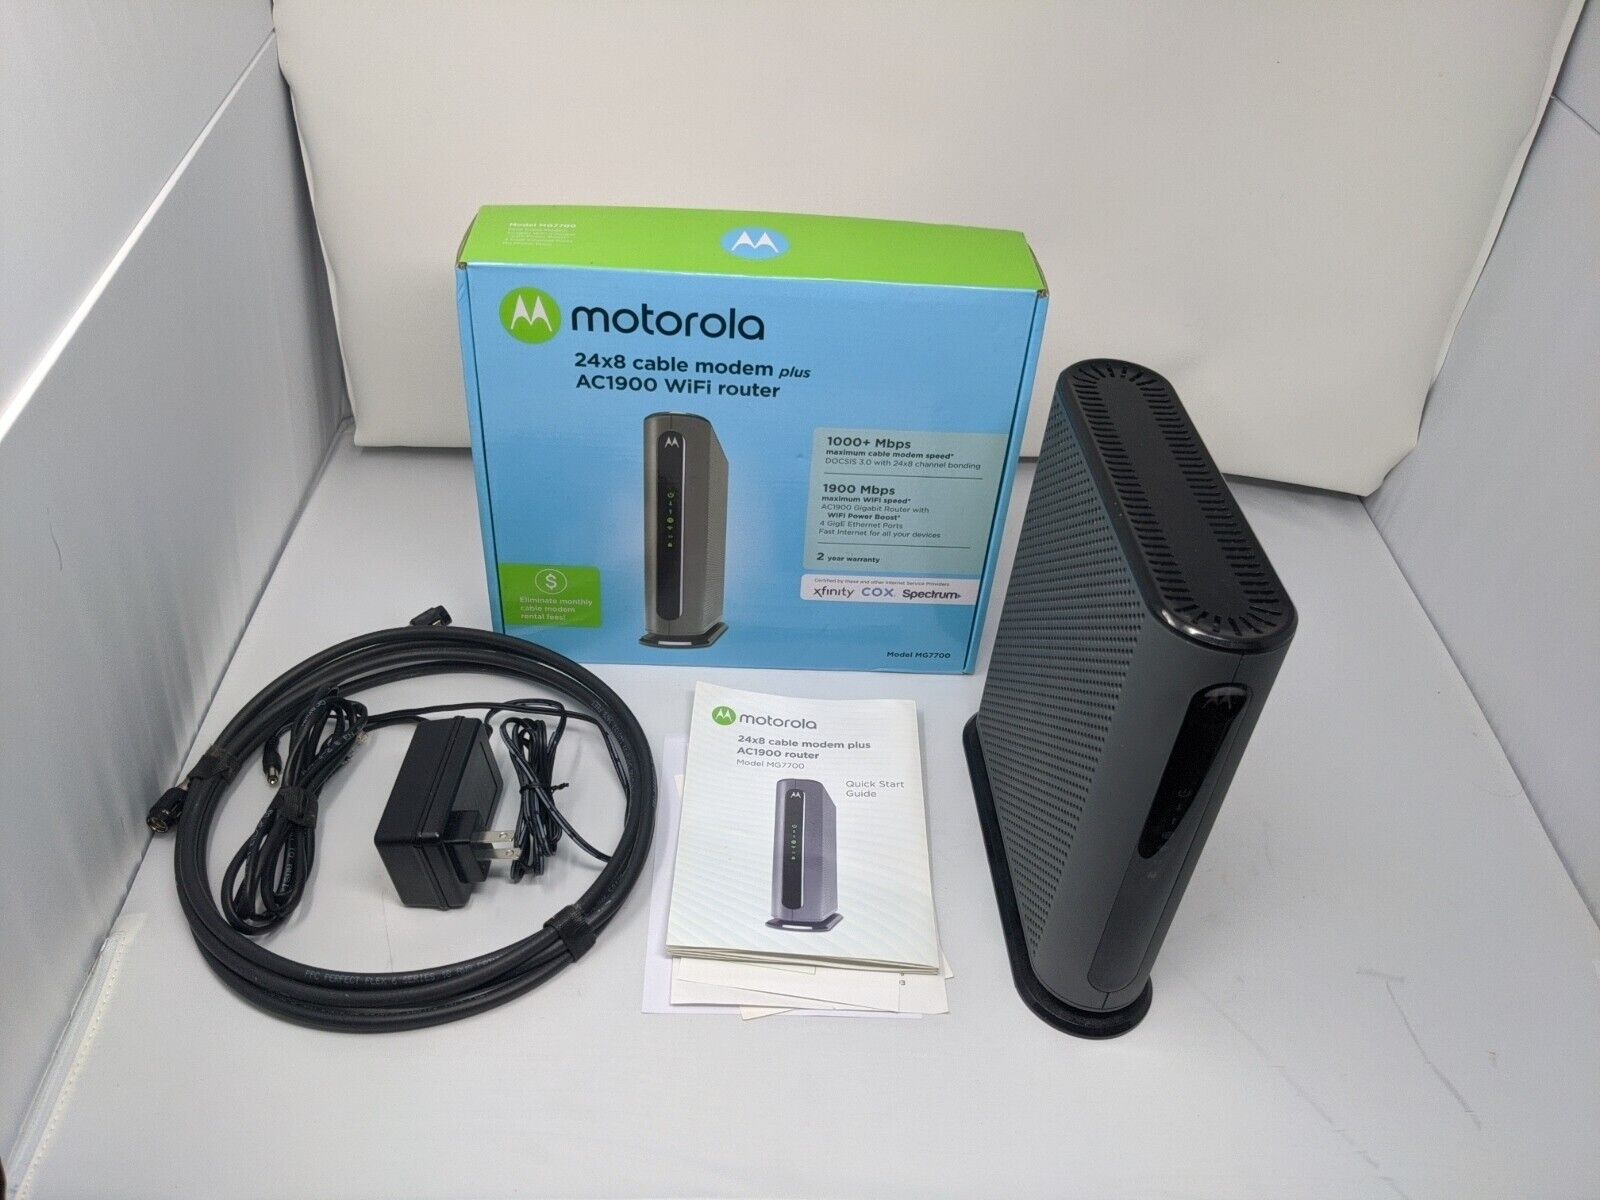 Motorola MG7700 AC1900 Dual-Band DOCSIS 3.0 Cable Modem Router Excellent Conditi